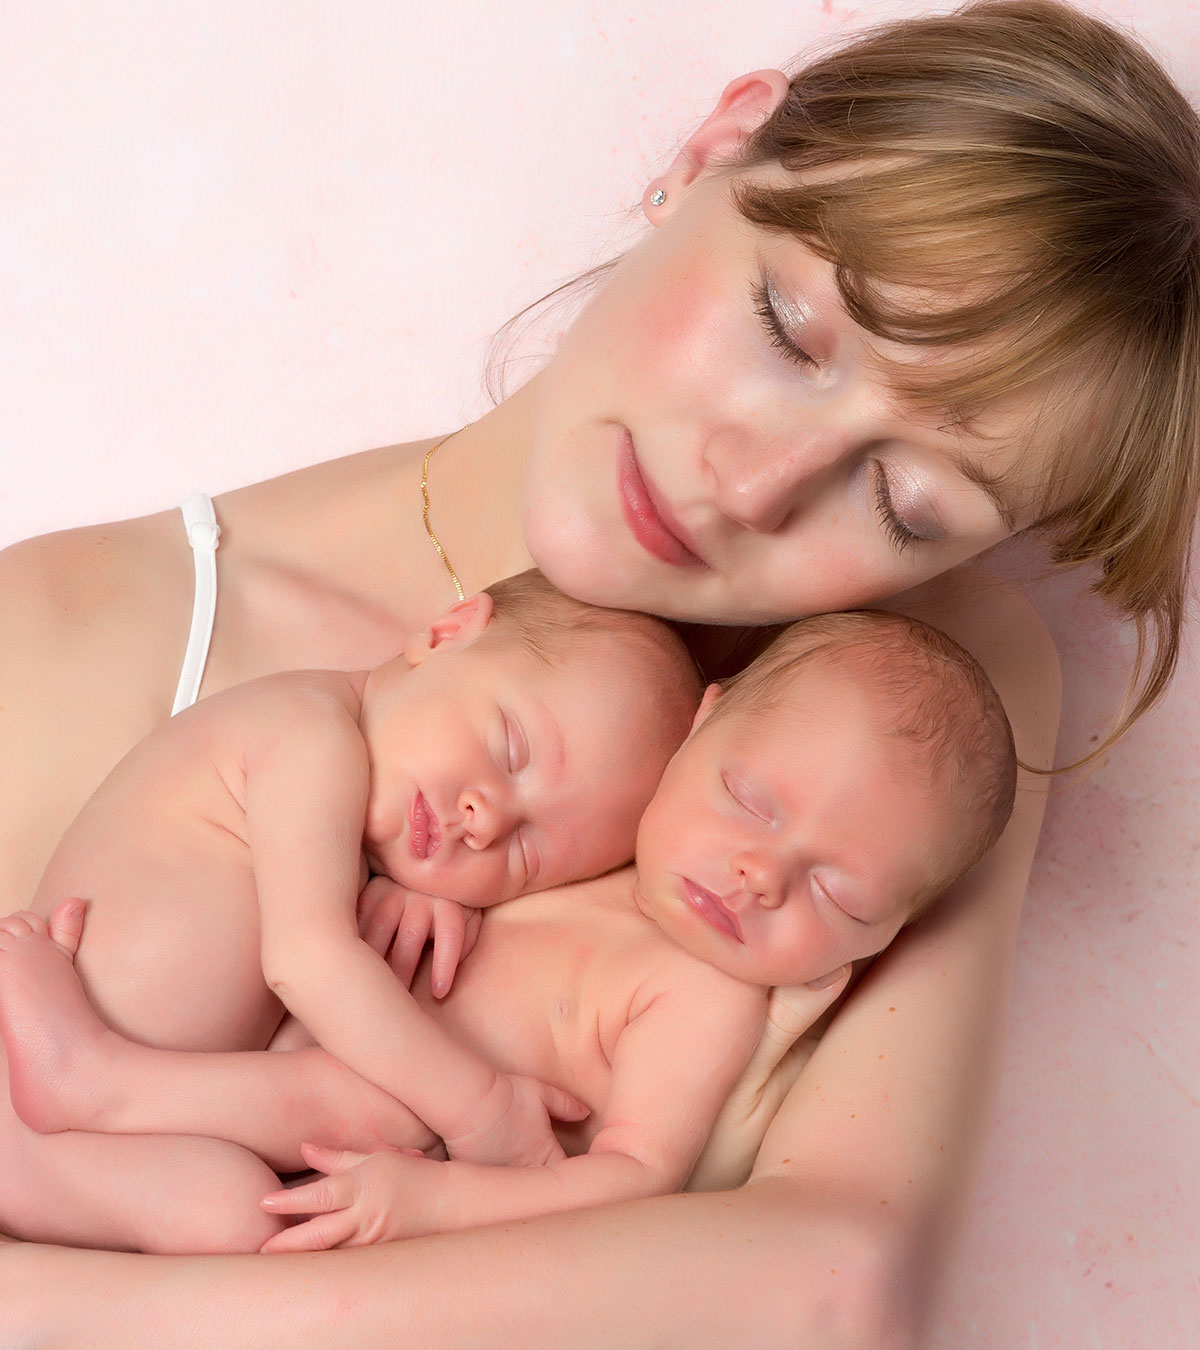 Twin Baby Care: 16 Tips To Make The Task Easier